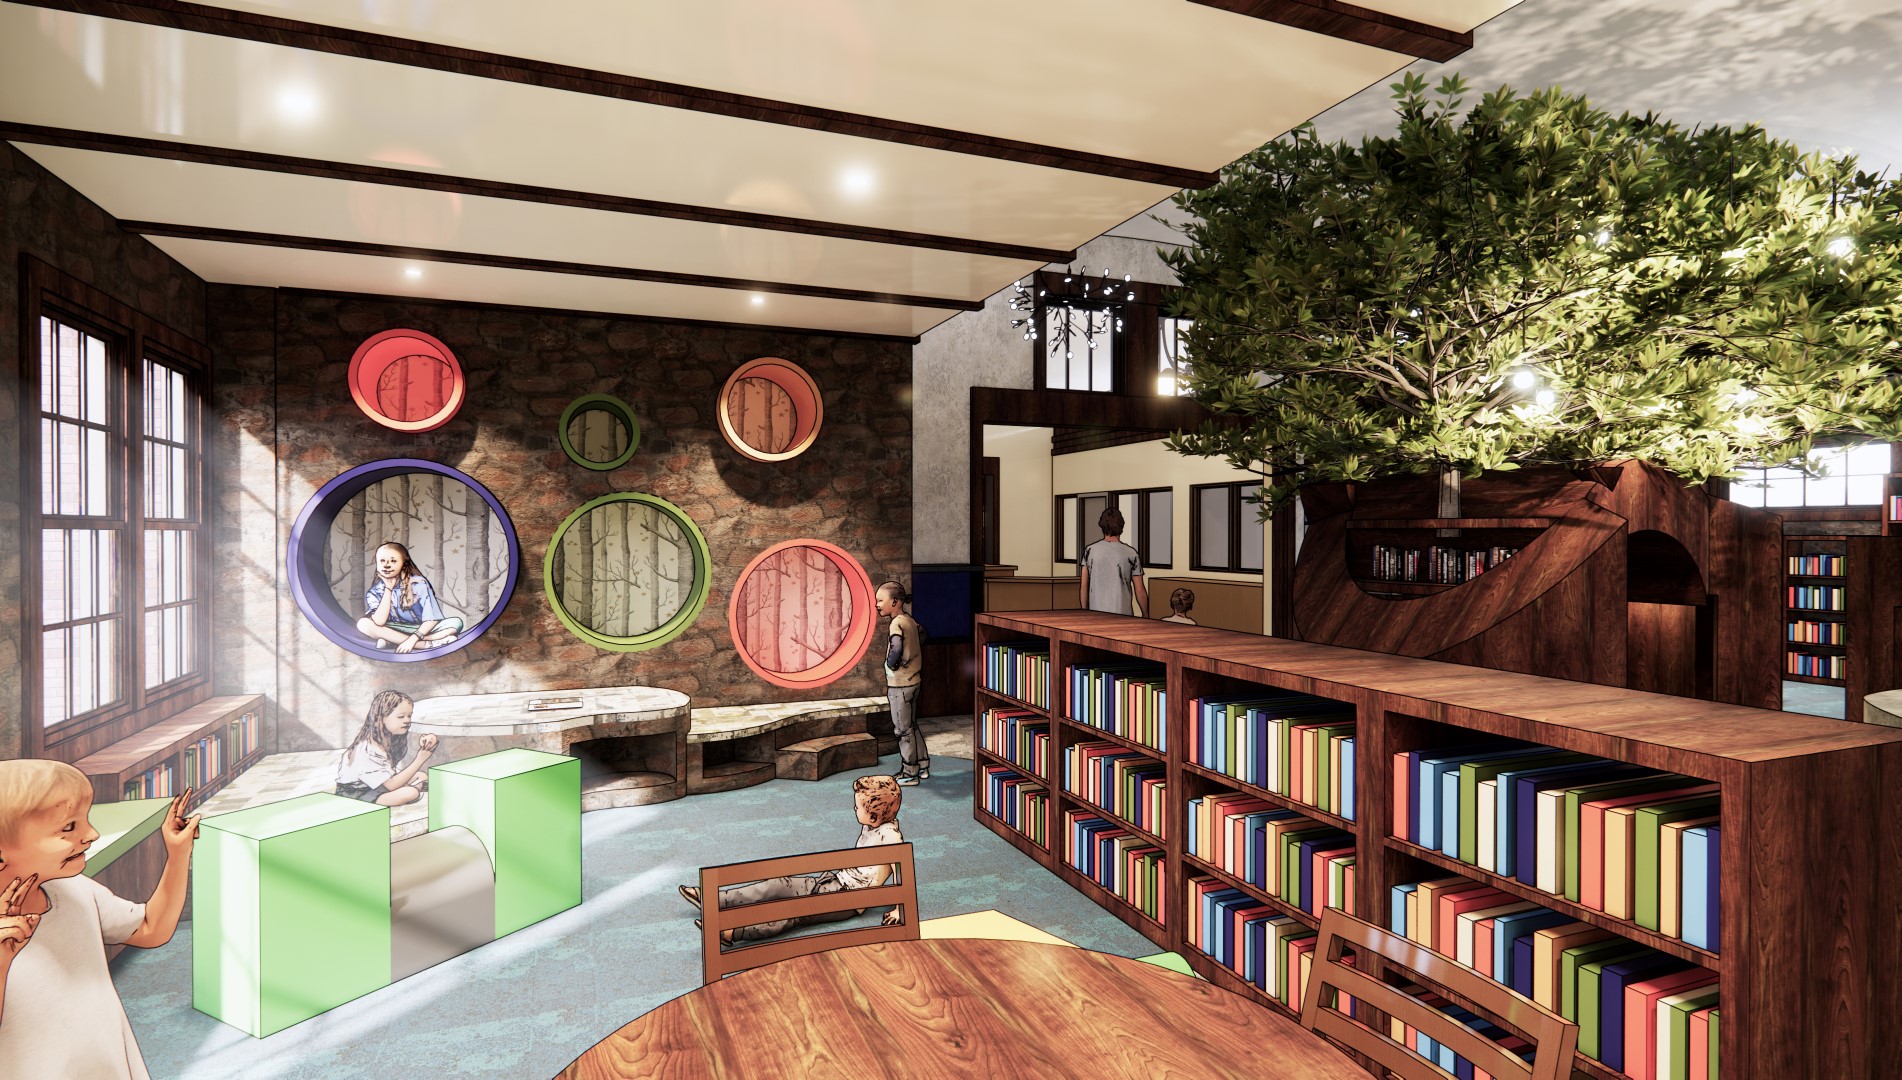 architectural rendering of room with long wooden bookcase, circular wall nooks large enough for children to sit inside, and a small multi-level stage for children to play